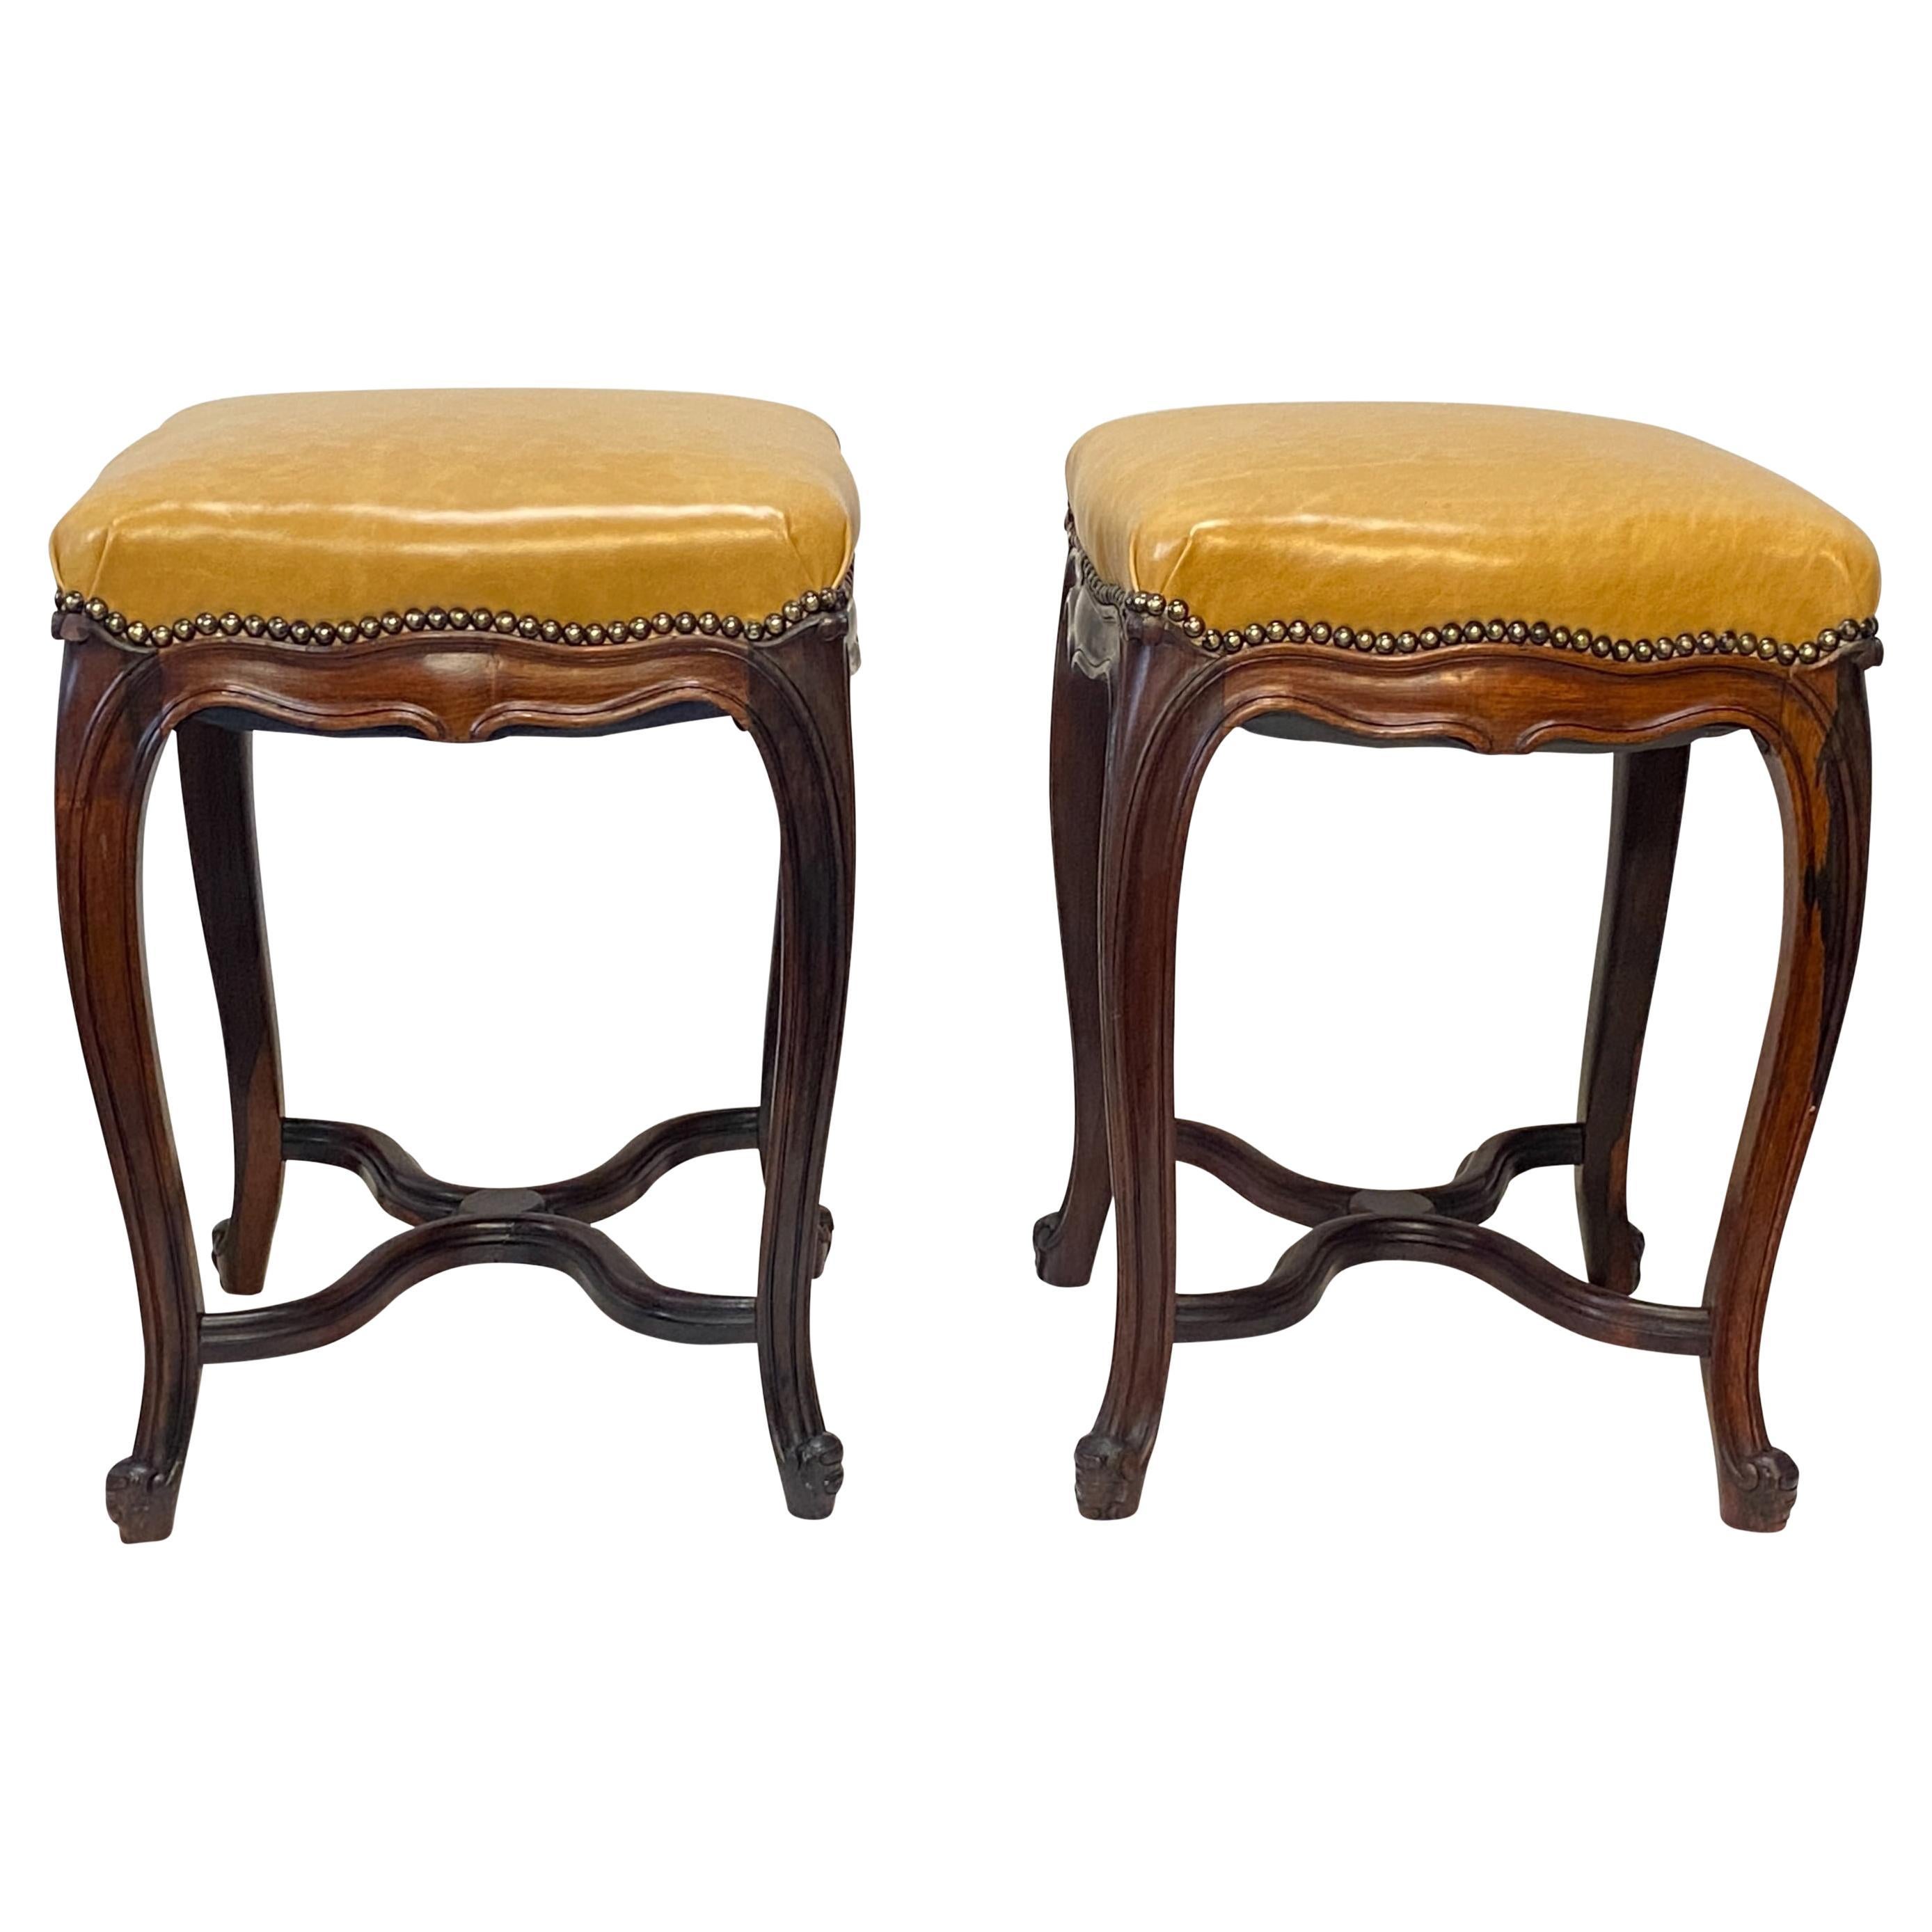 Louis XV Style Rosewood and Leather Tabouret Stools, French 19th Century